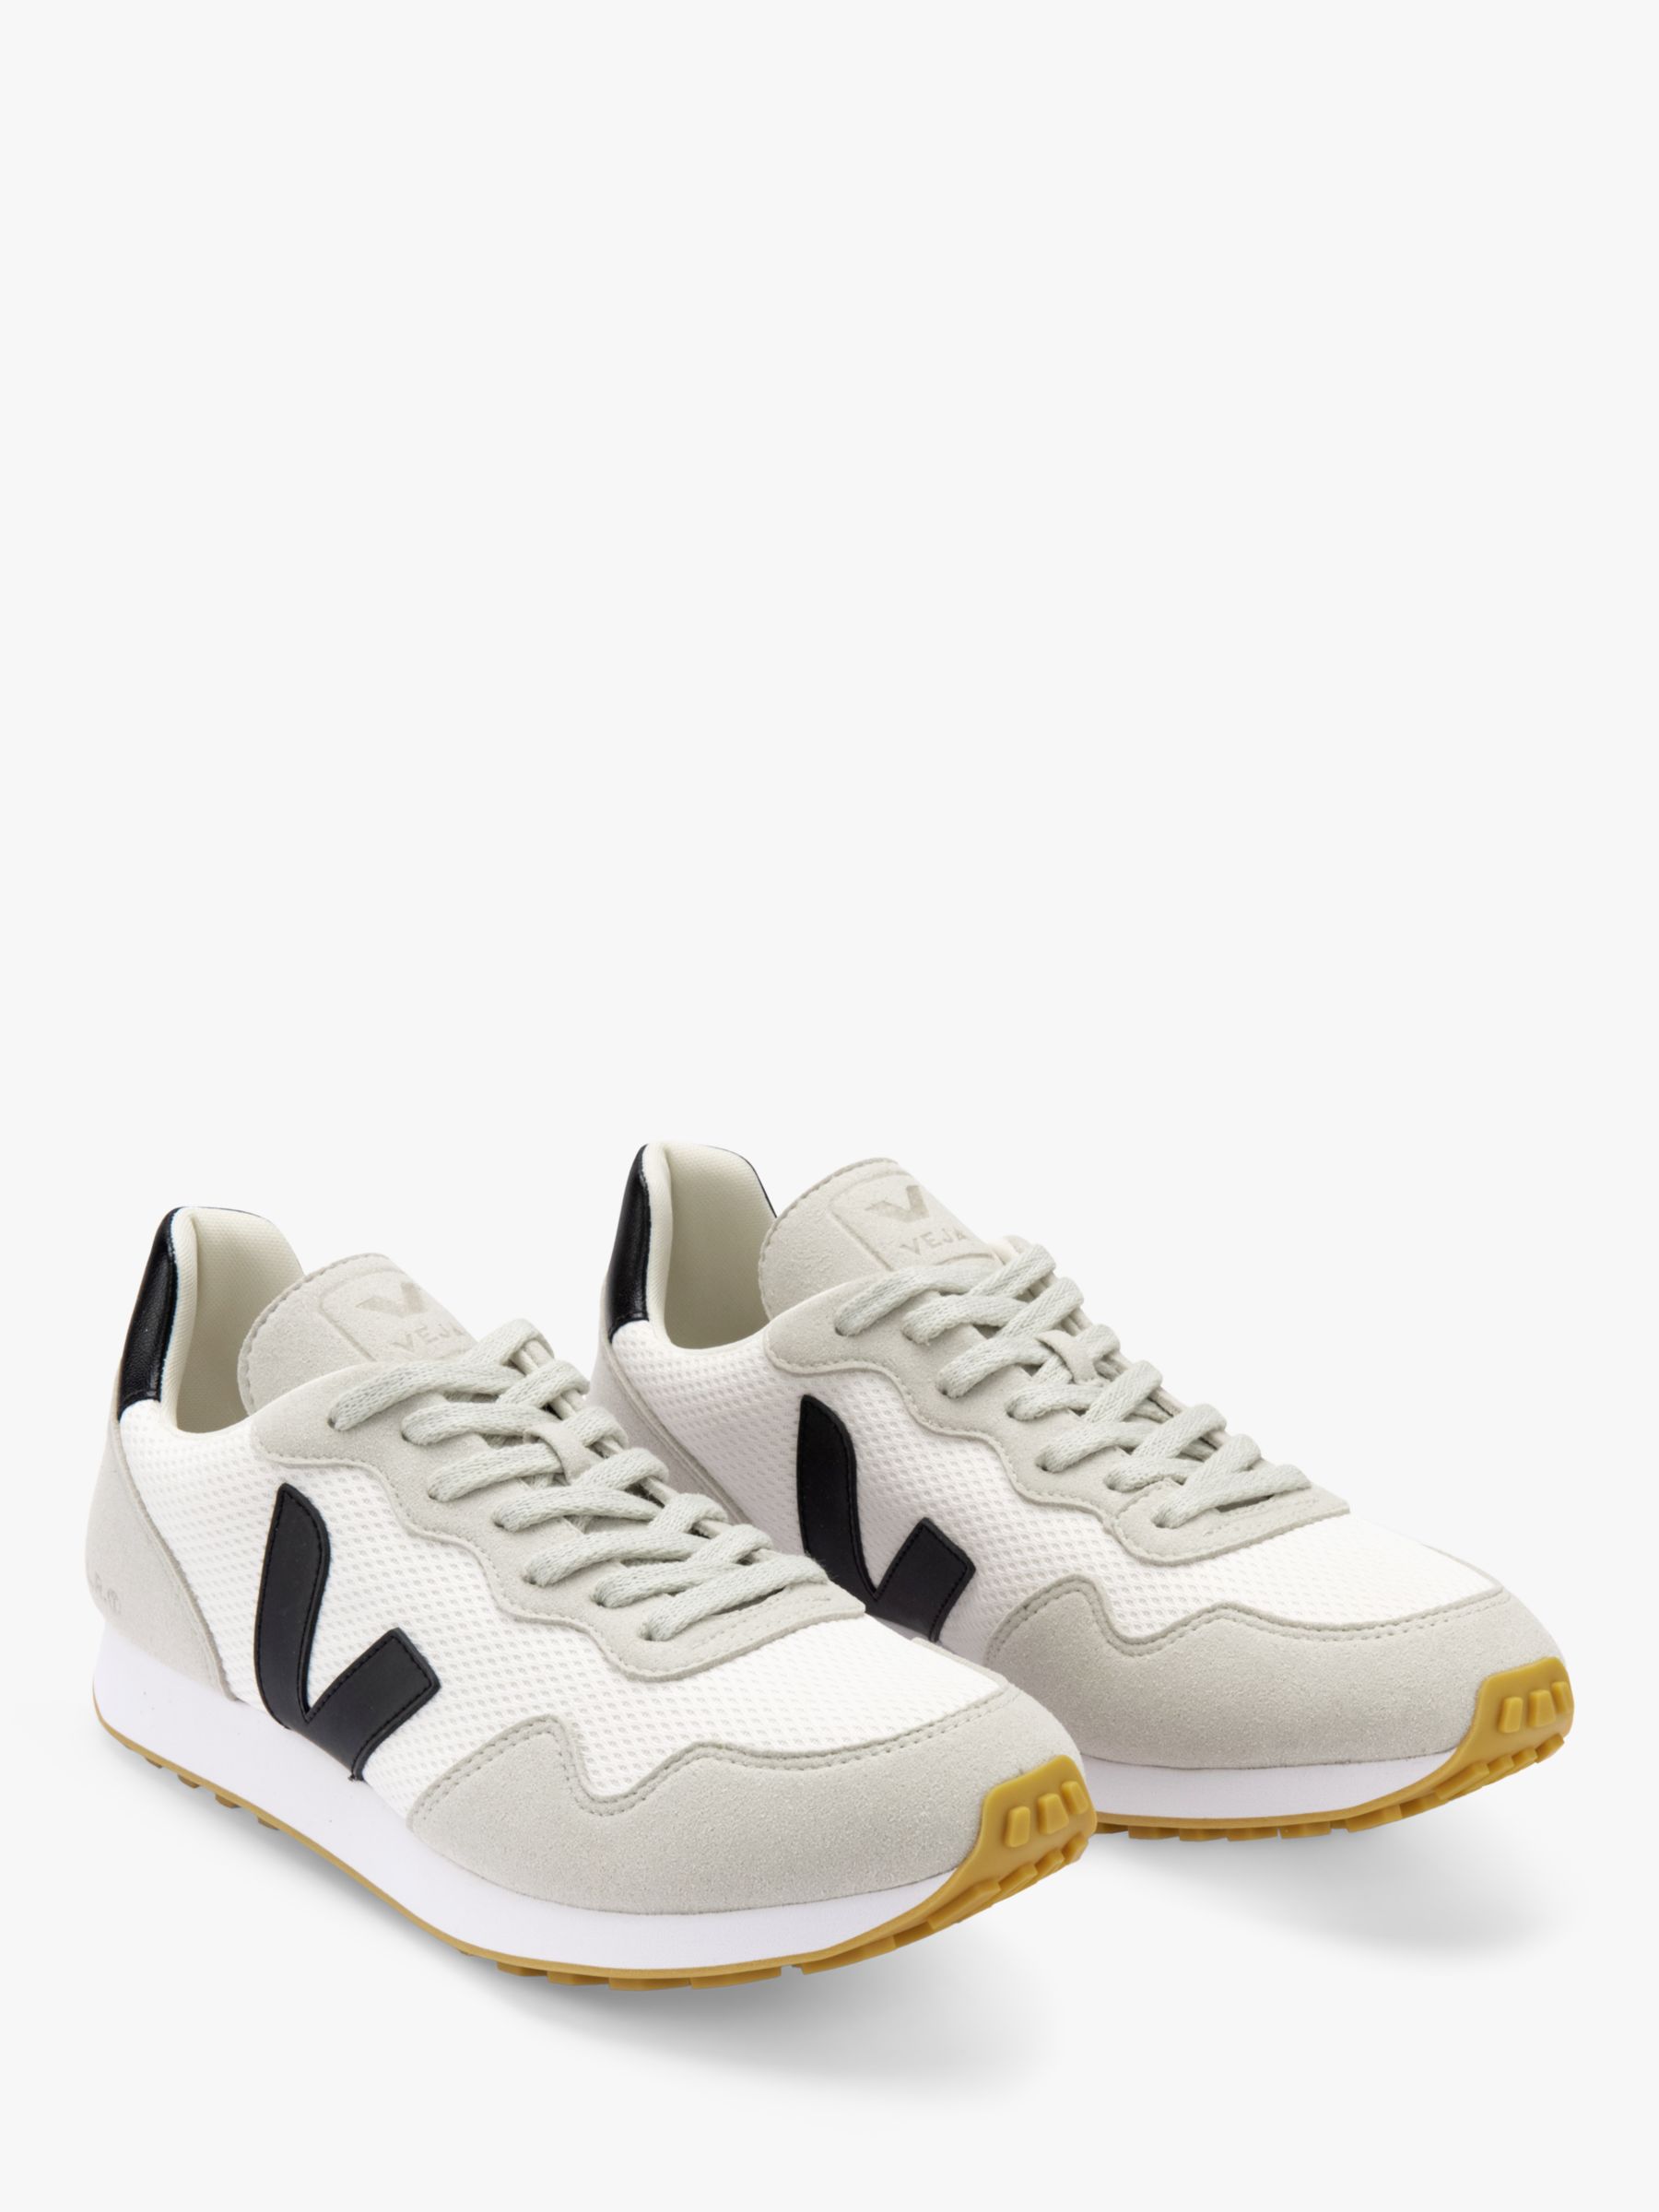 VEJA Lace Up Trainers, White Gum, 7